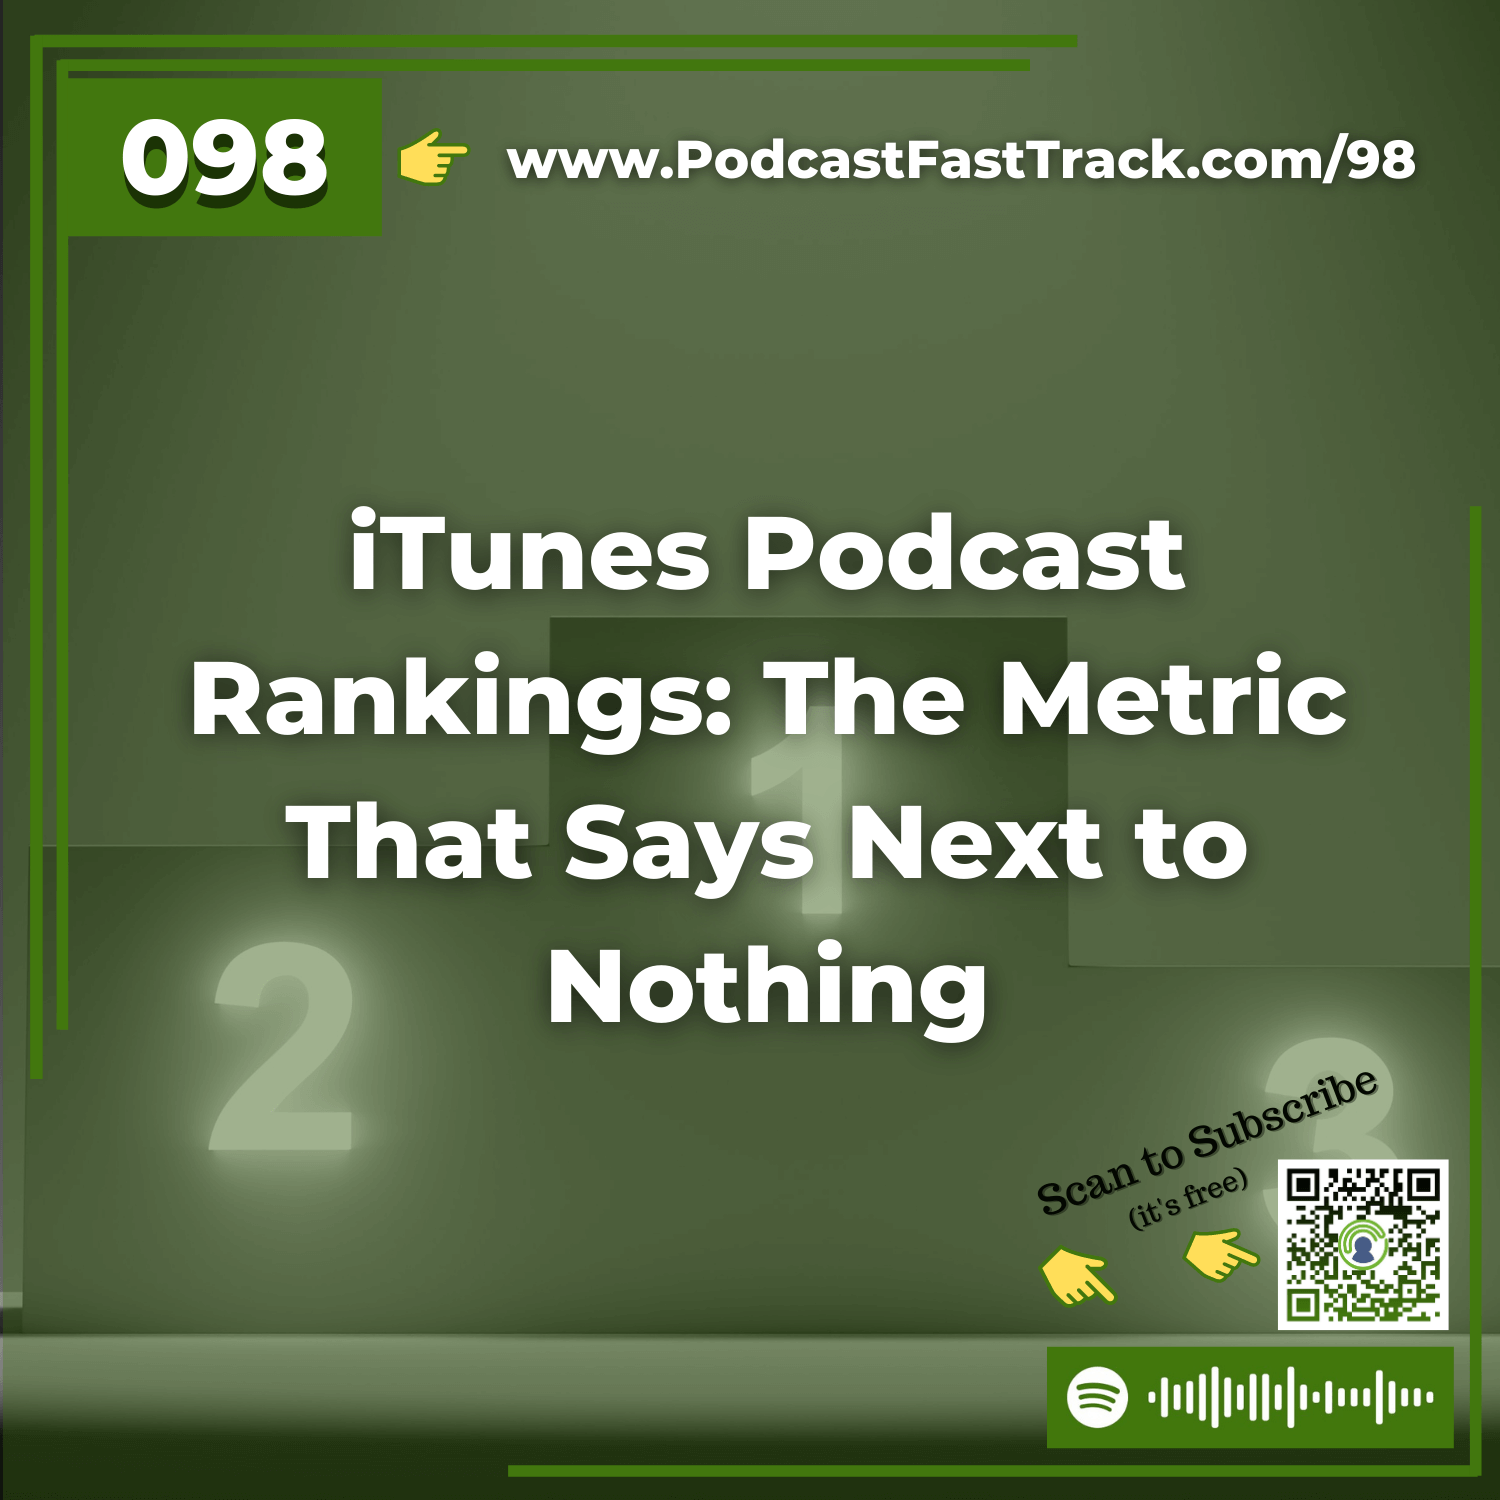 98: iTunes Podcast Rankings: The Metric That Says Next to Nothing